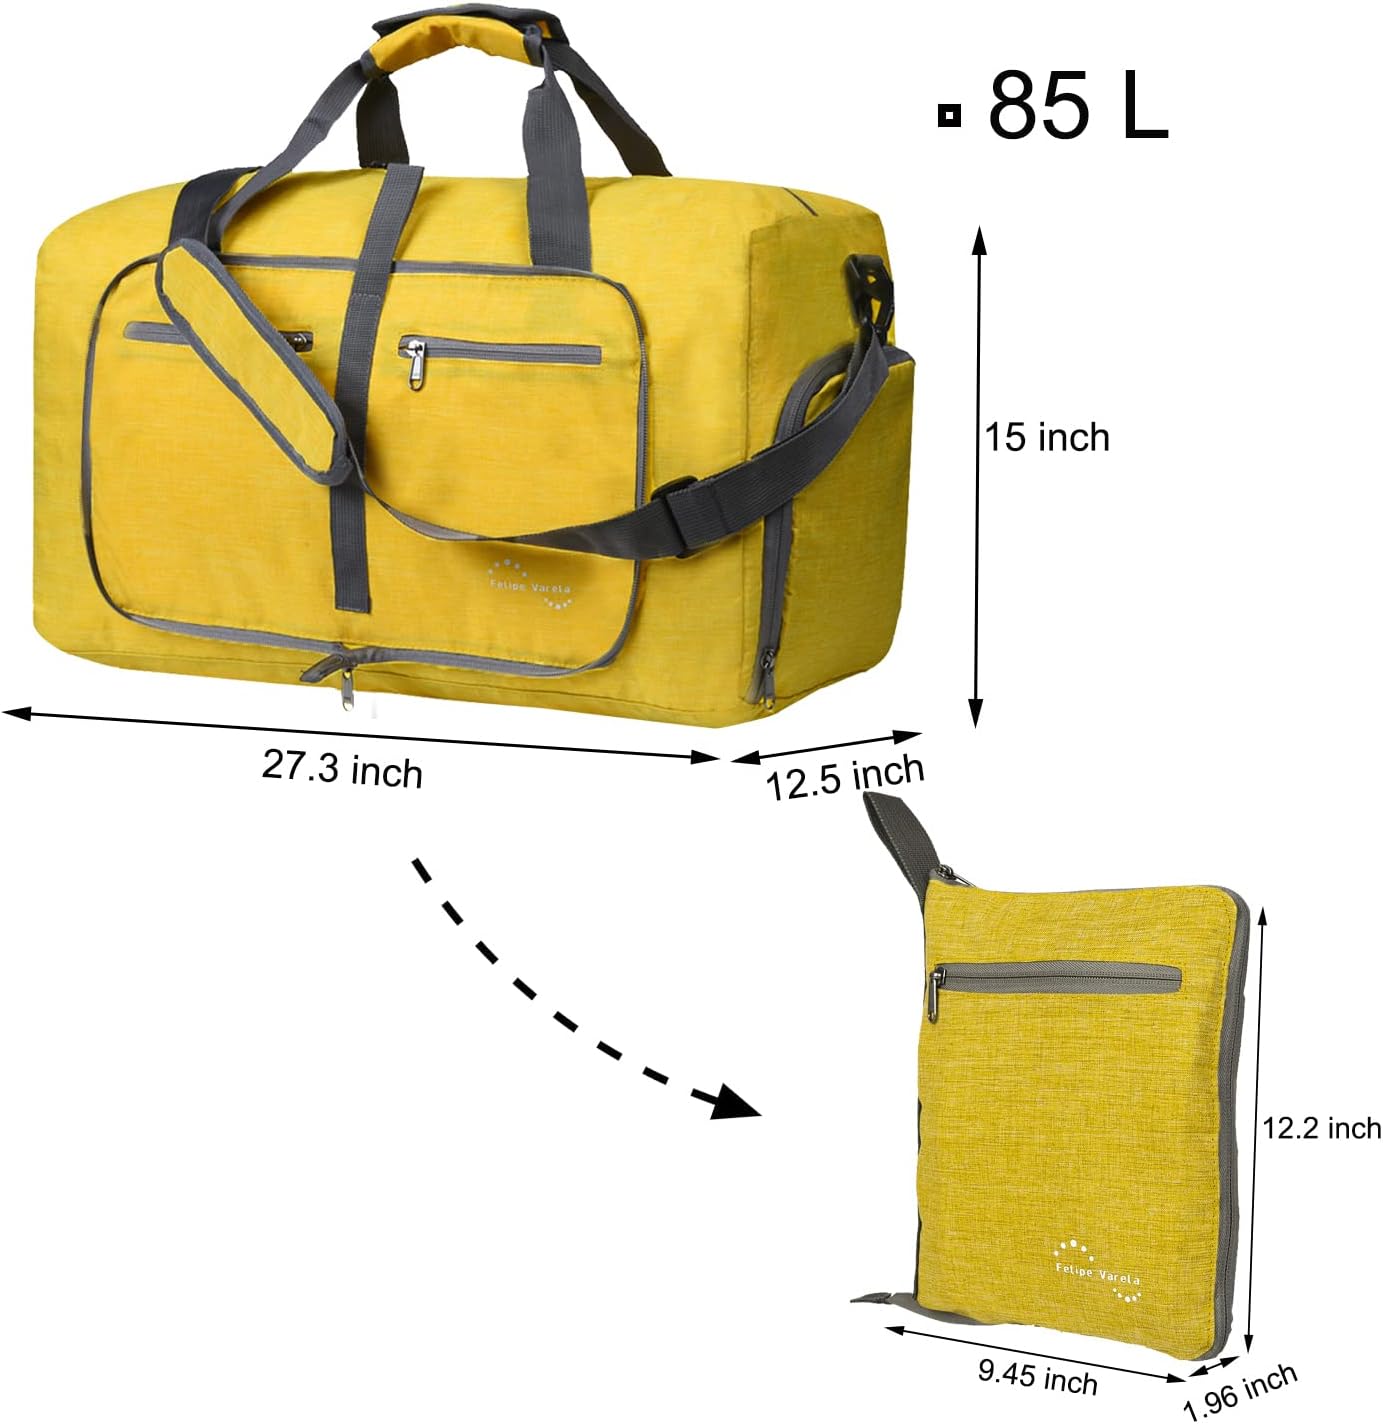 Foldable Travel Bag, Light Weight Carry Luggage Bag